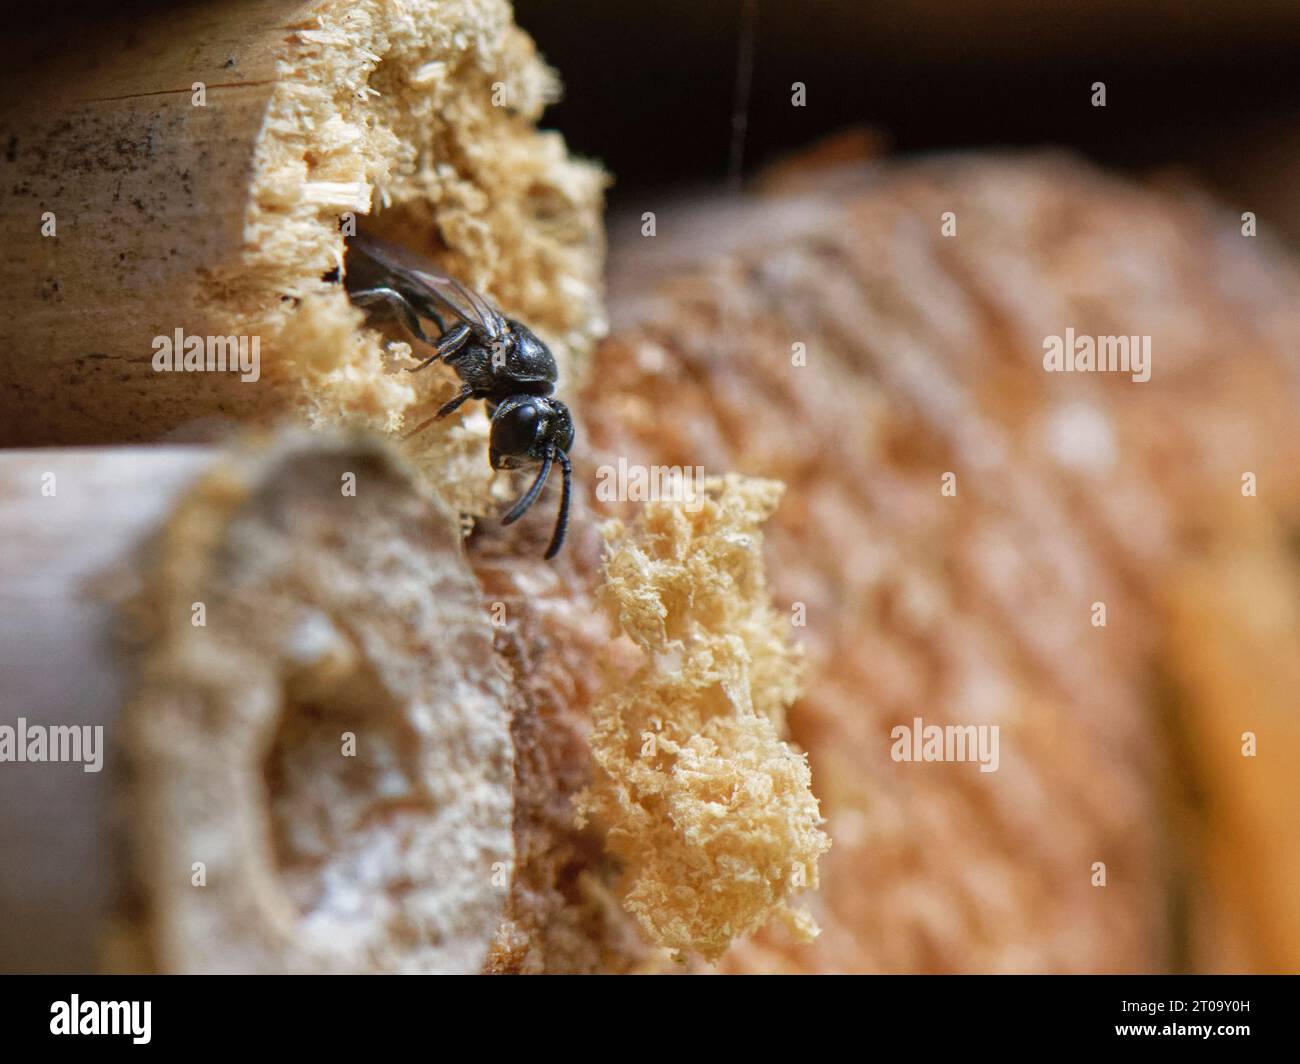 Pale-footed black wasp (Psenulus pallipes) an aphid-hunting crabronid wasp excavating a bamboo tube in an insect hotel, Wiltshire, UK, August.  Check Stock Photo